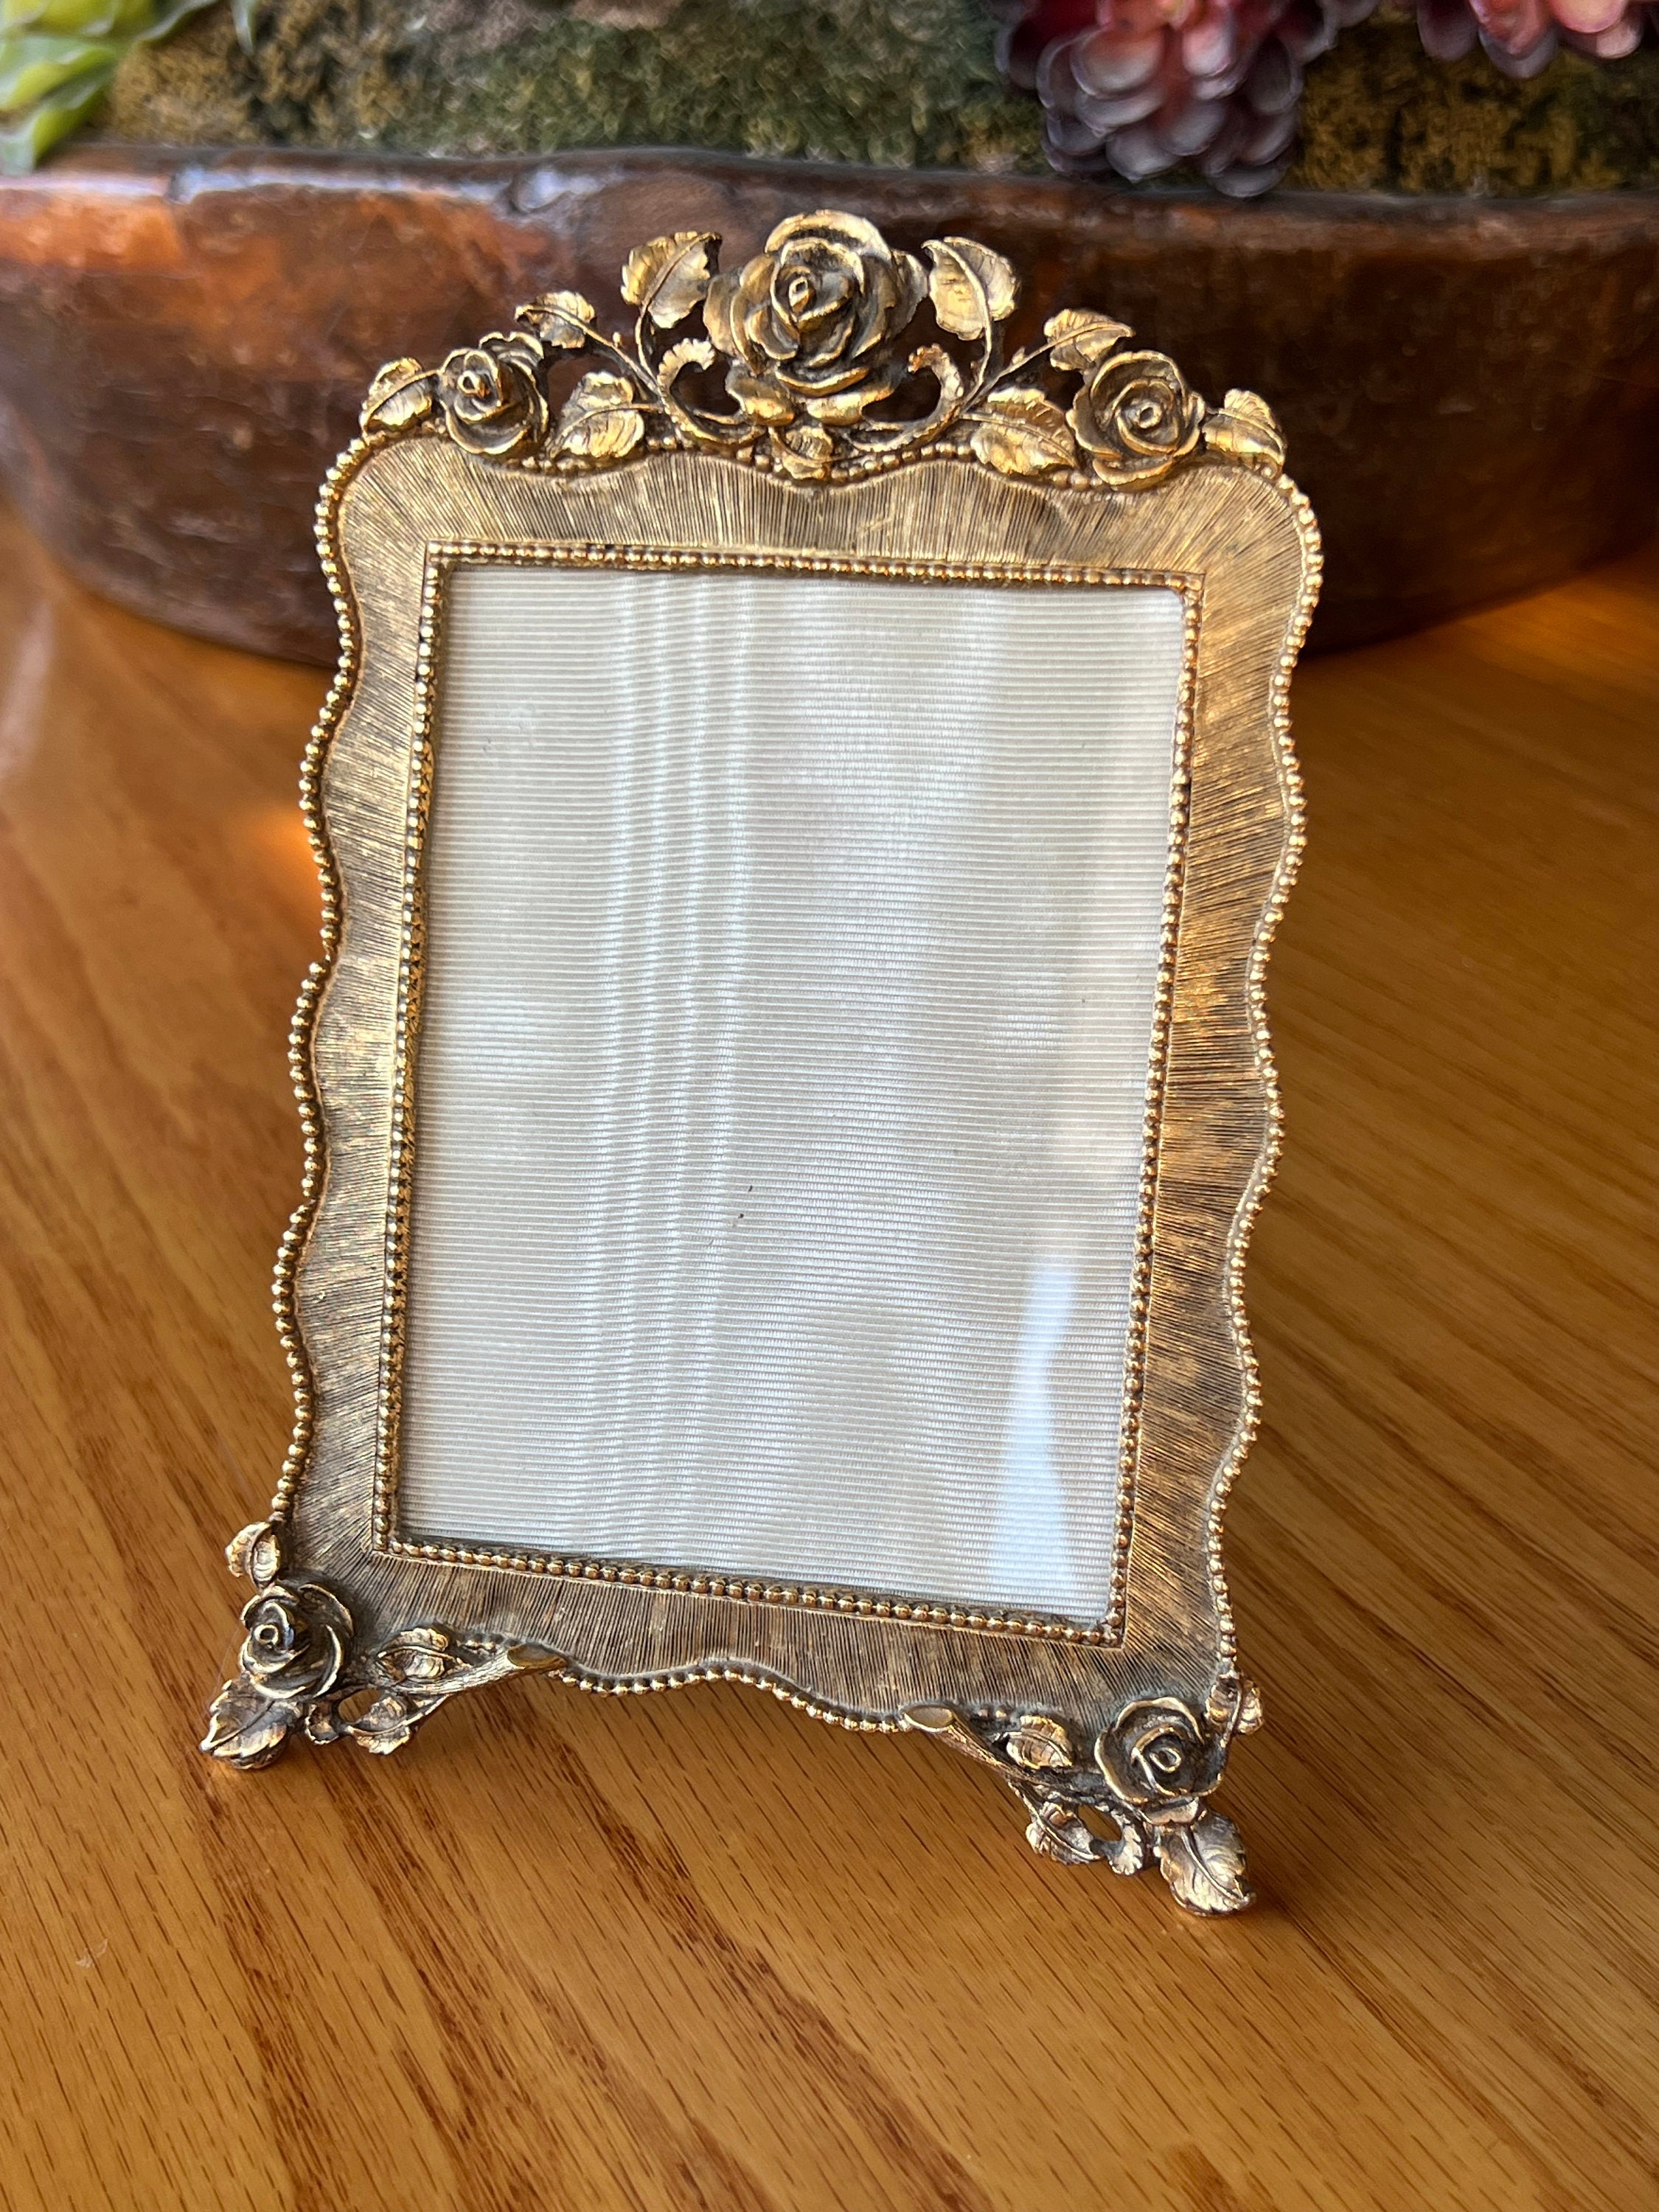 Ornate Metallic Red Gold Picture Frame,Fancy Gold Red Frame,Gold Ornate  Frame,Gold Frame,Red Frame,Antique Frame,Ornate 5x7,Ornate 11x14,4x6